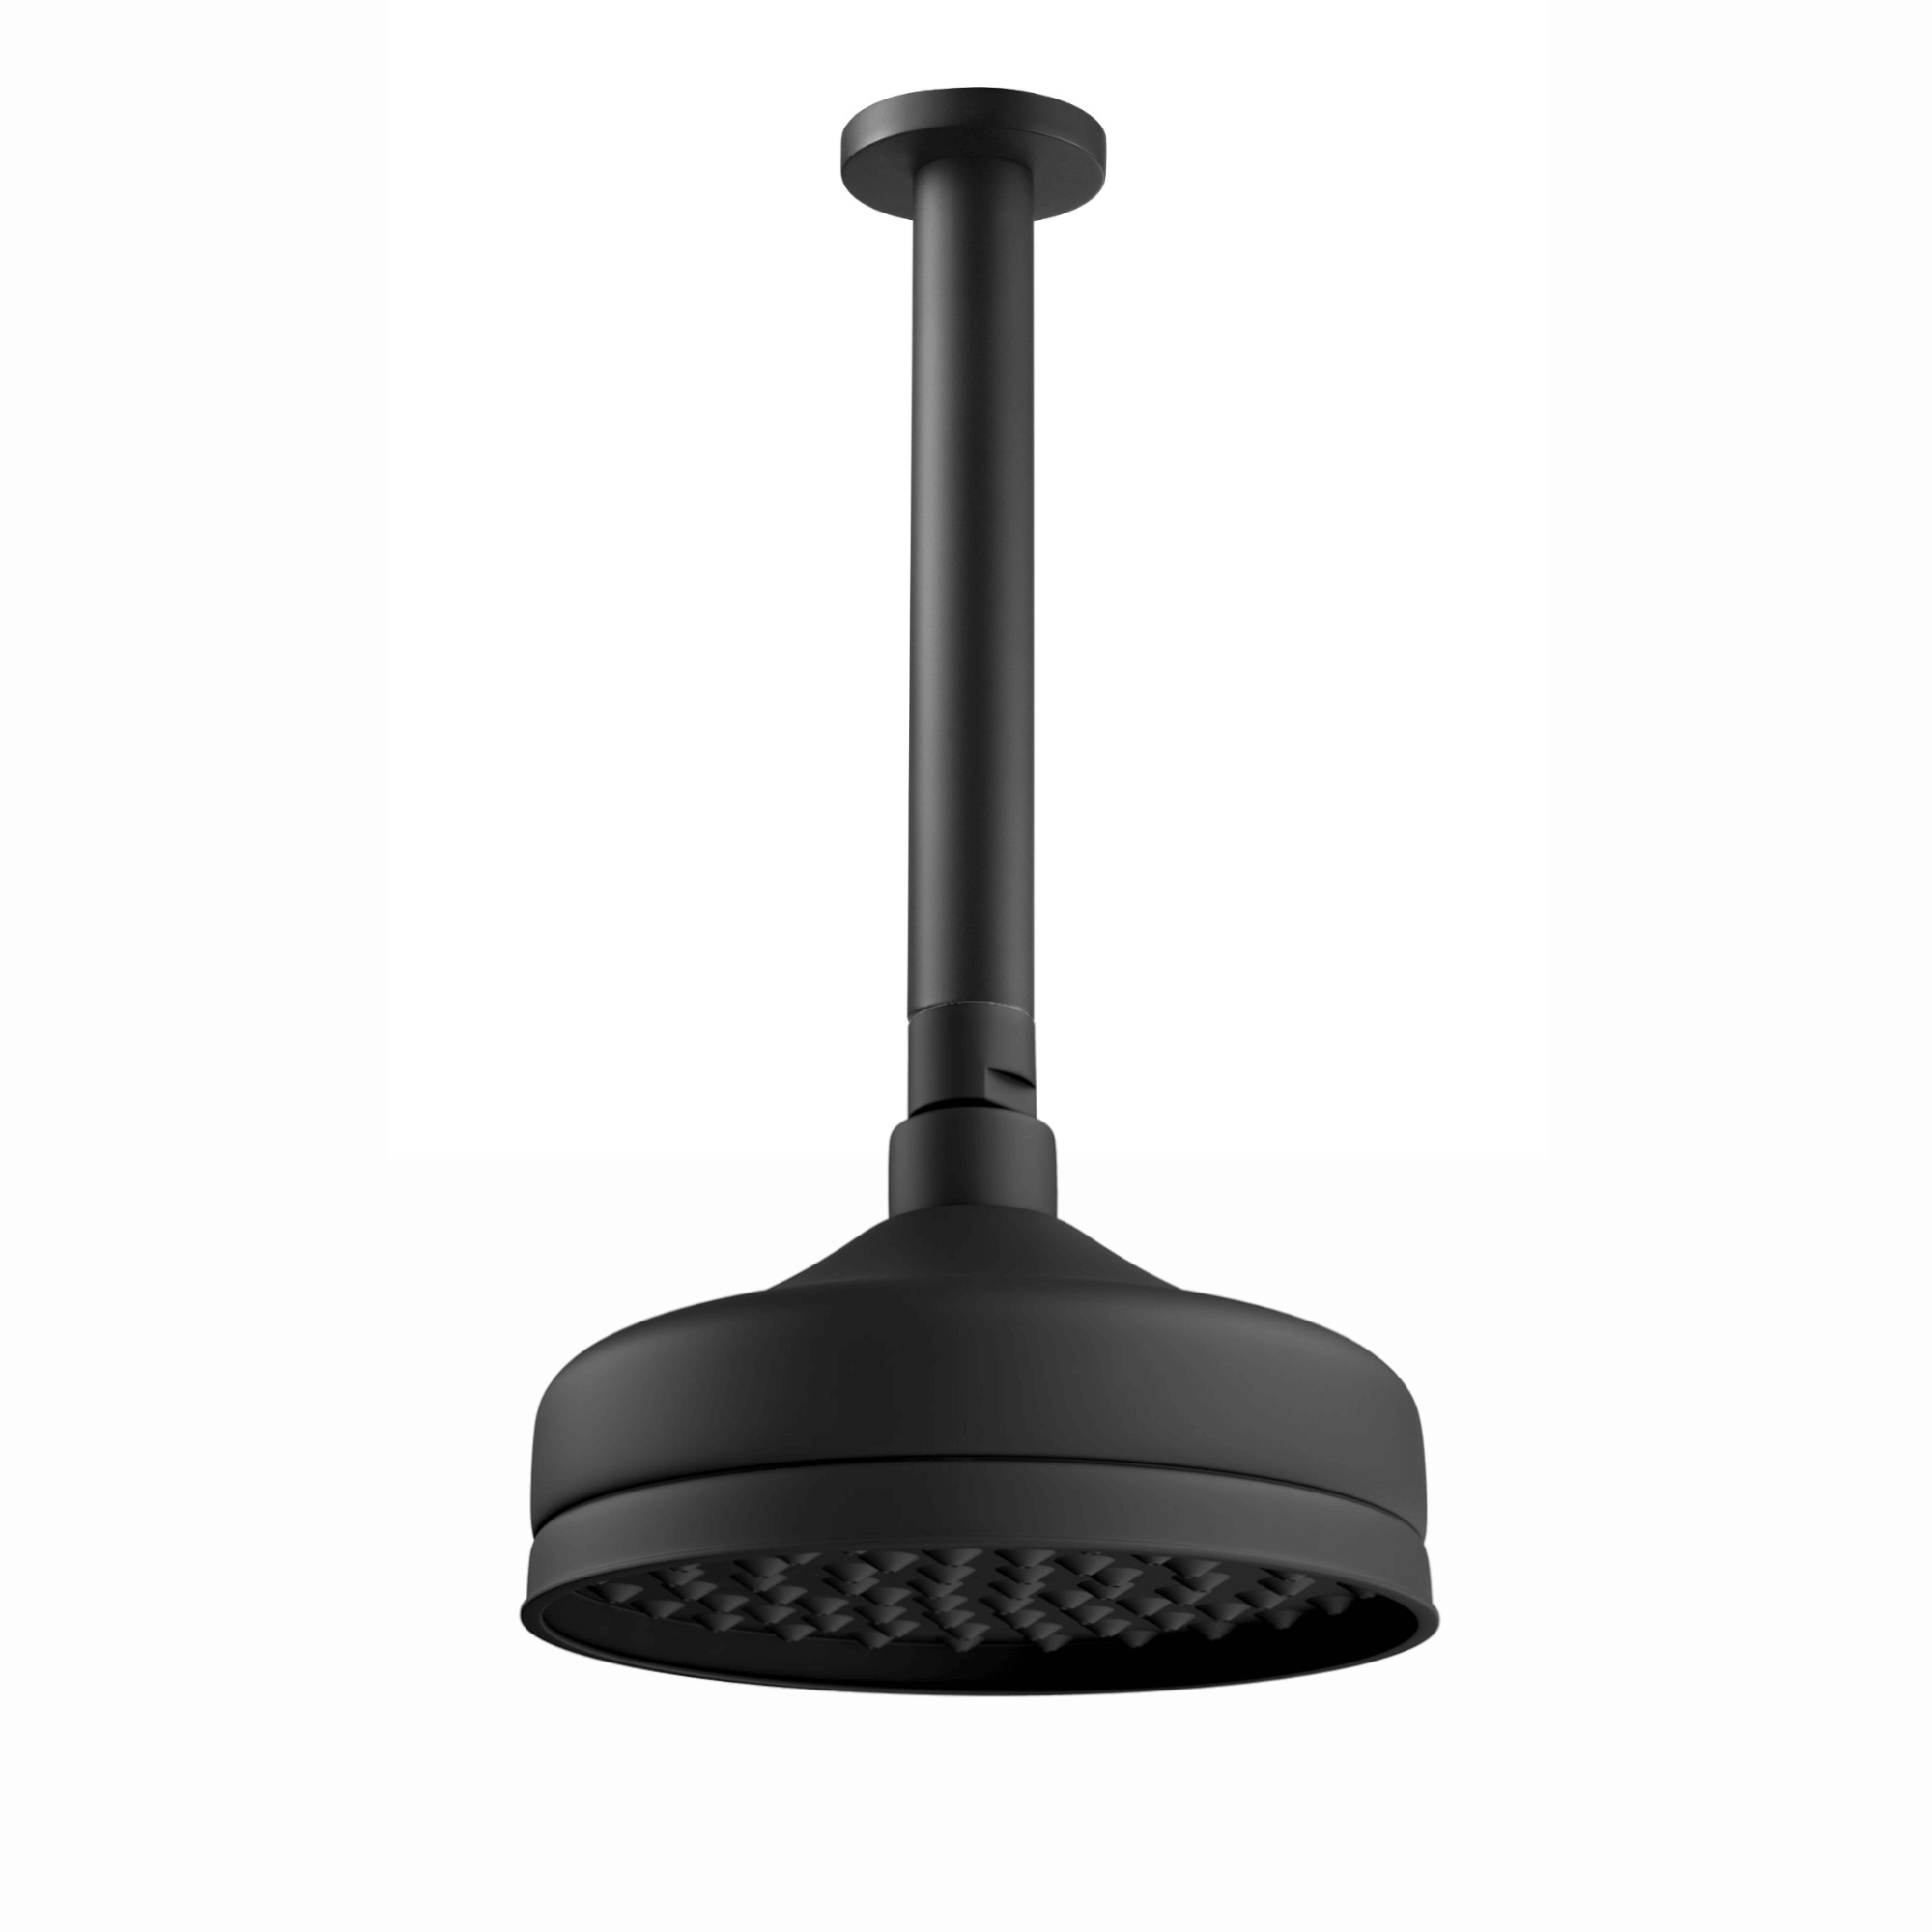 Traditional Ceiling Fixed Apron Brass Shower Head 6" With 180mm Ceiling Shower Arm - Black